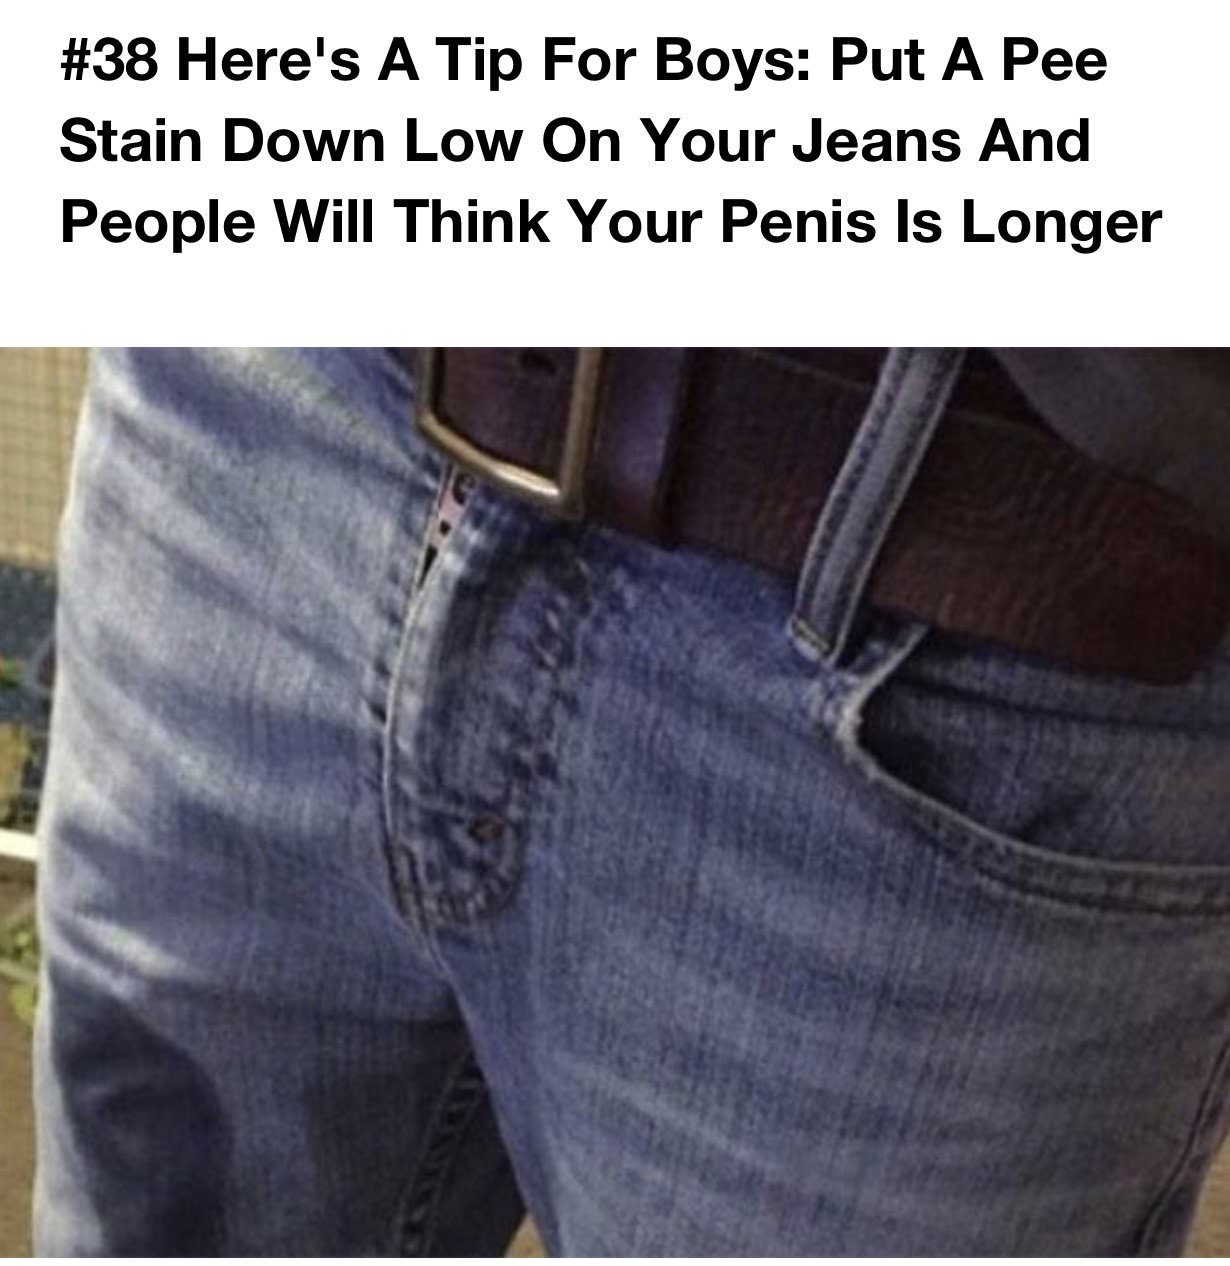 cold one with the lads - Here's A Tip For Boys Put A Pee Stain Down Low On Your Jeans And People Will Think Your Penis Is Longer